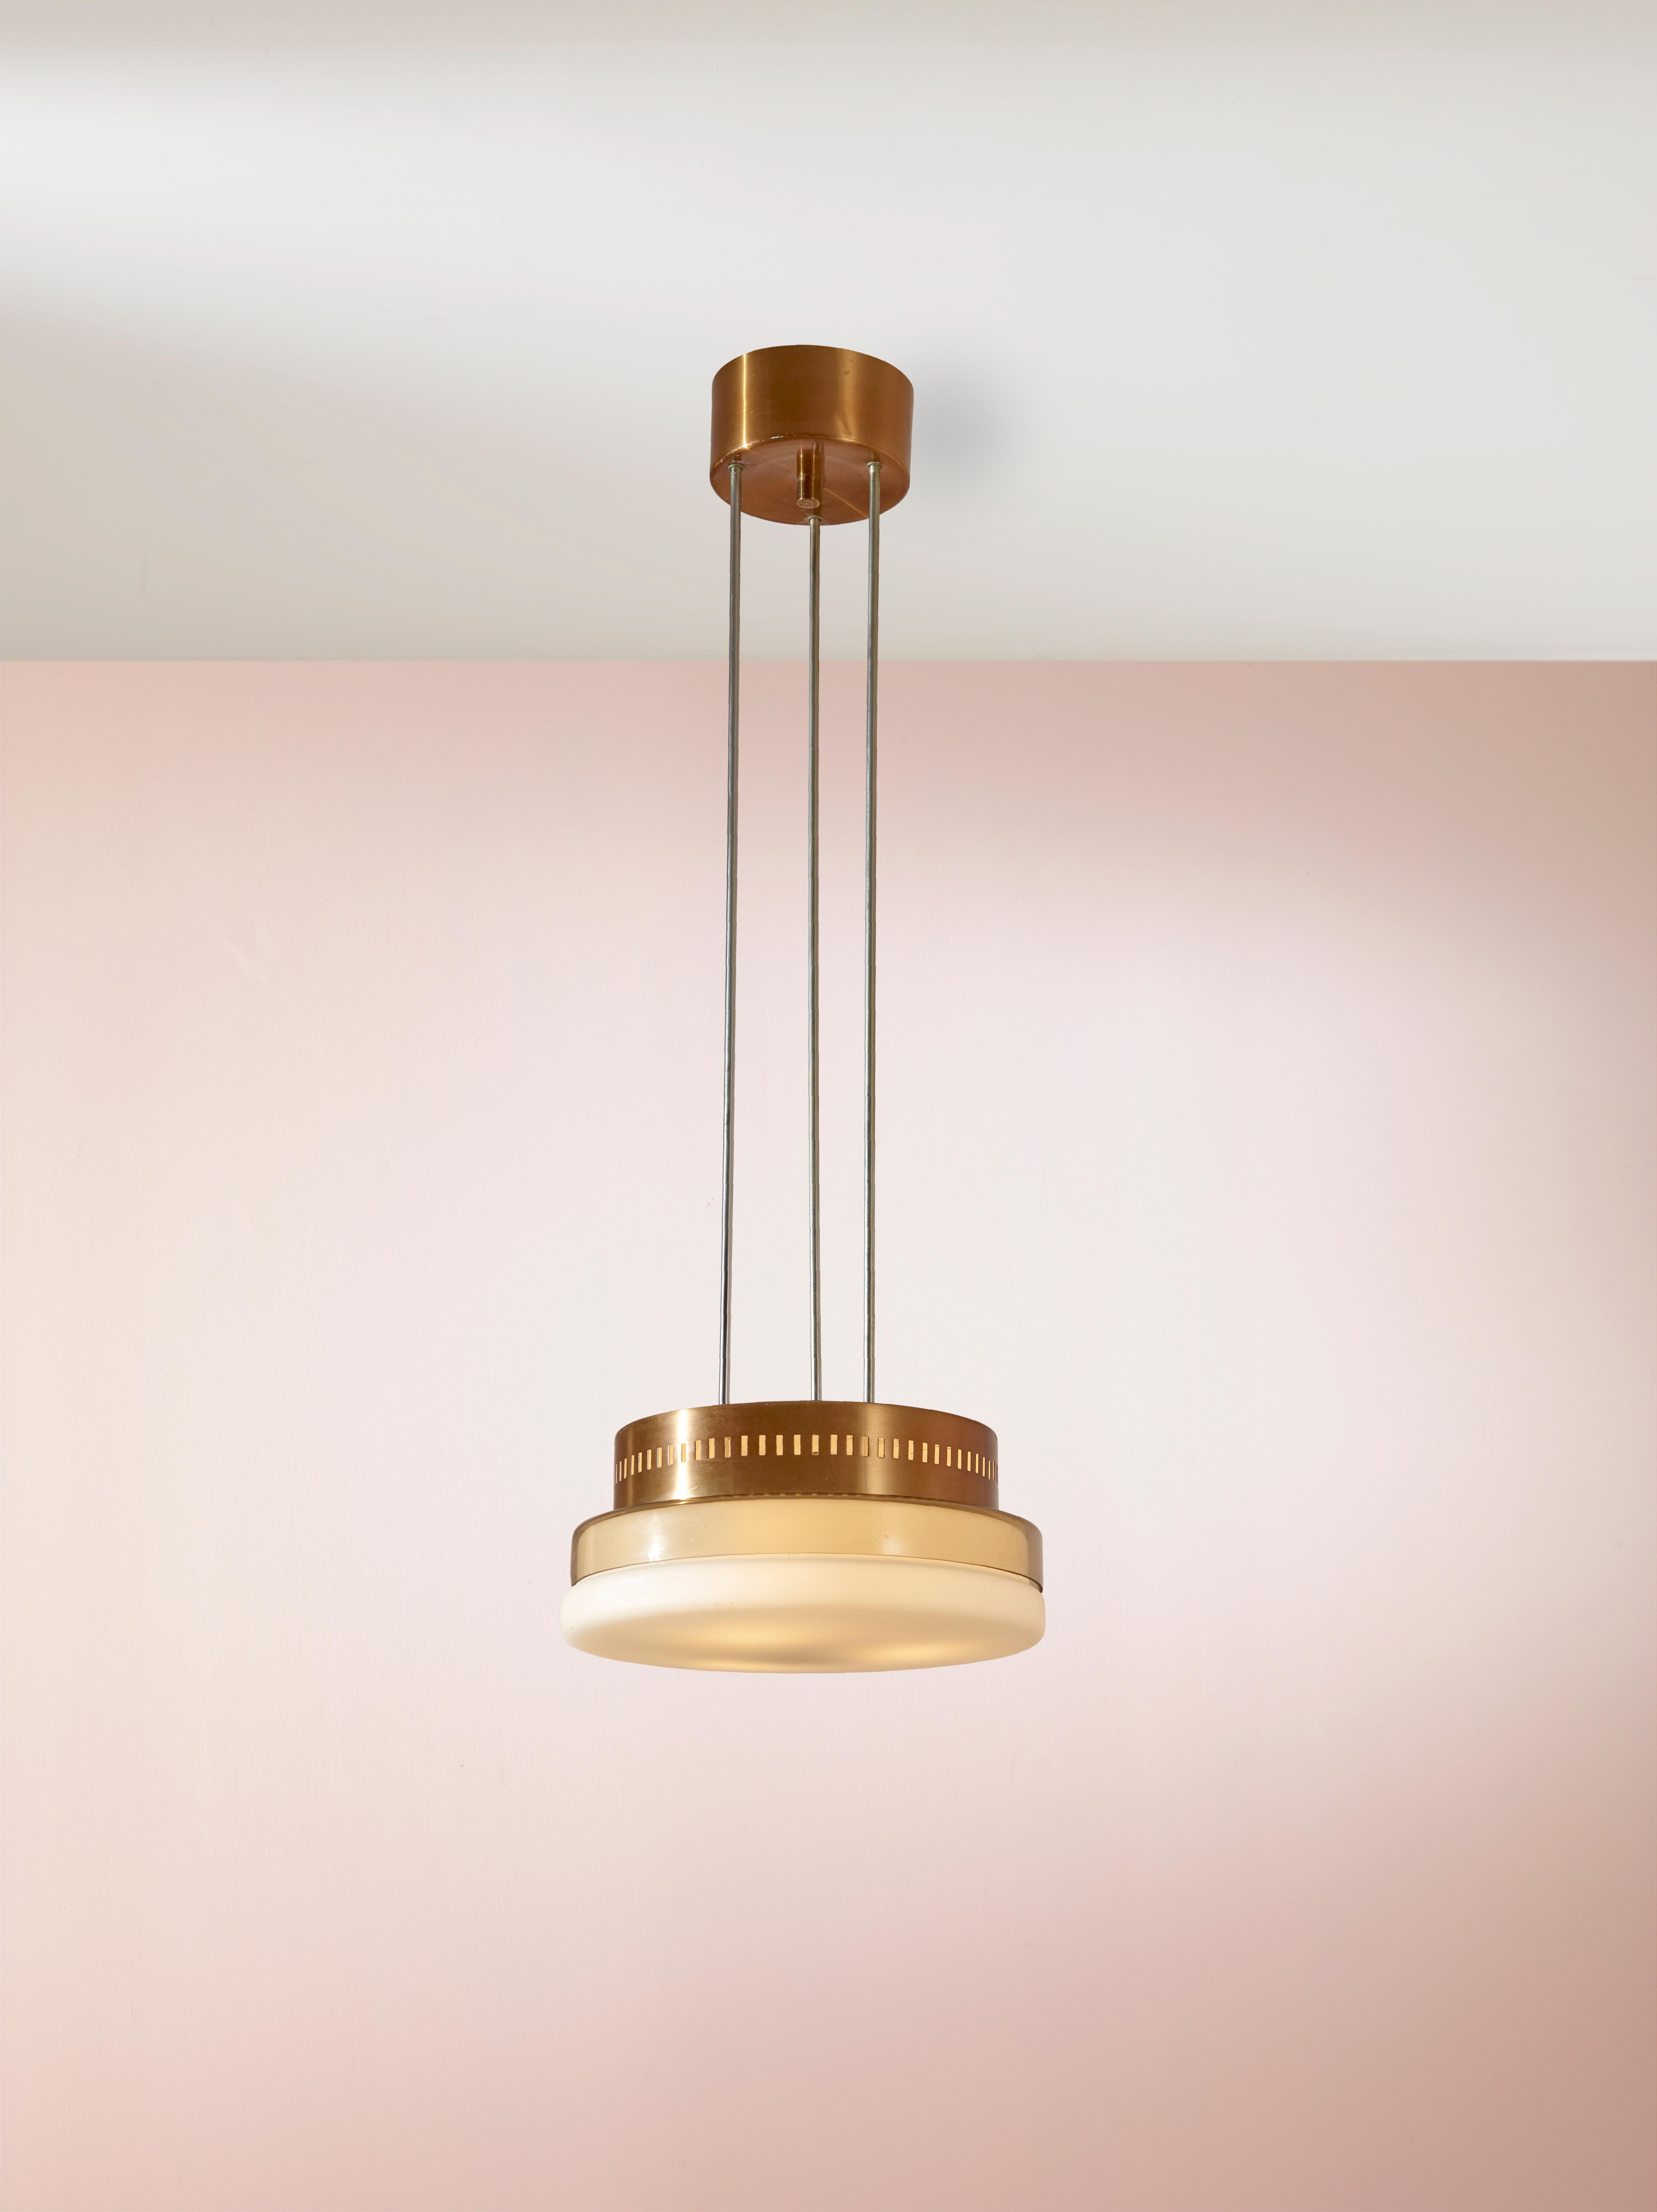 This midcentury pendant light, attributed to Stilnovo, is a beautiful example of Italian midcentury lighting design. 

The use of copper as the primary material for the structure of the light, paired with the opaline glass diffuser, lends an air